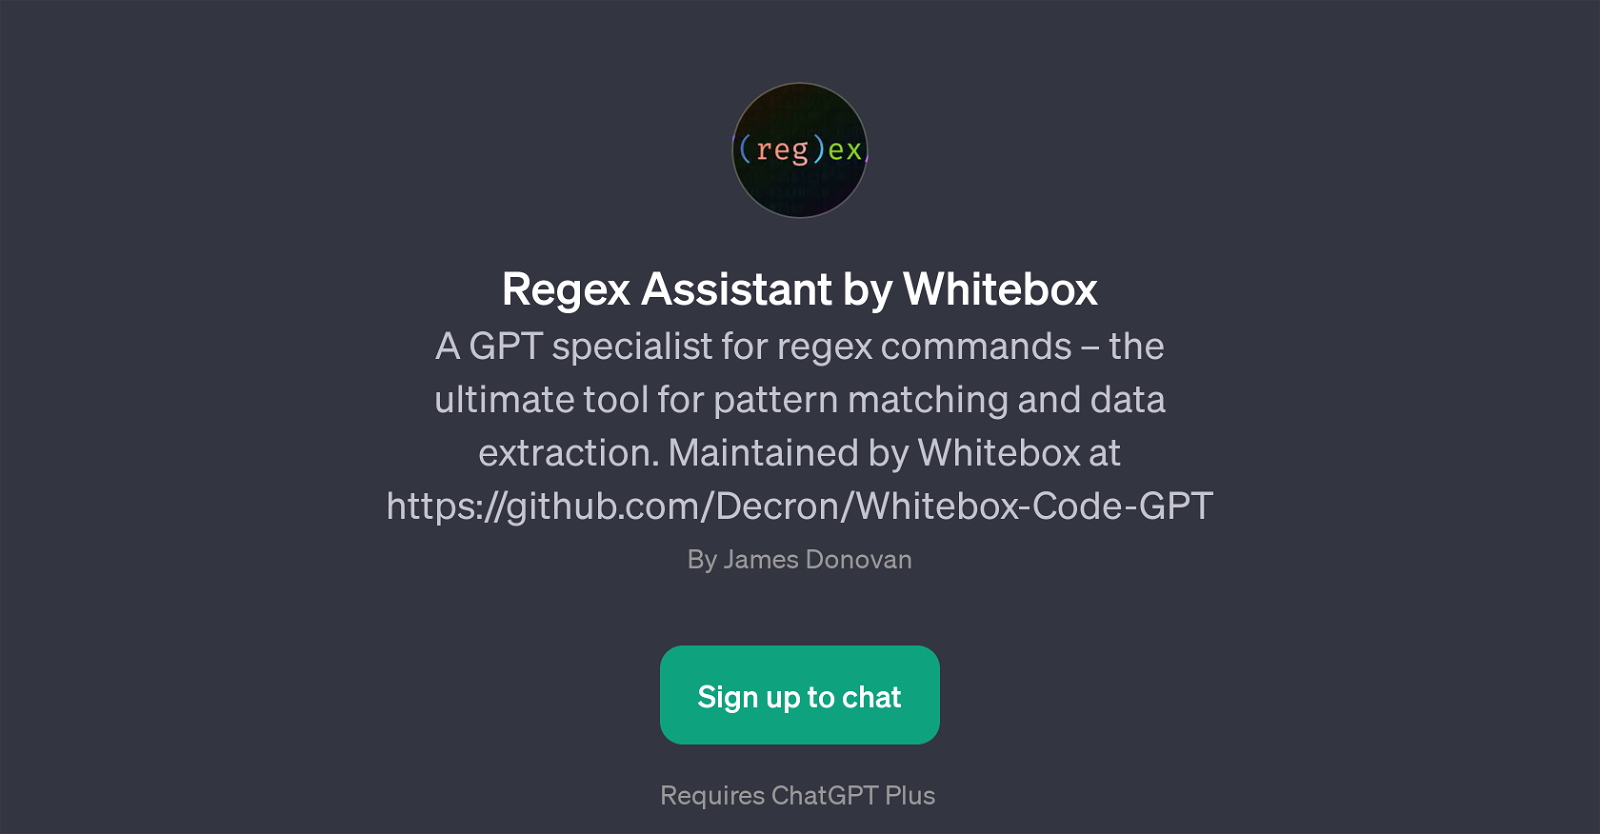 Regex Assistant by Whitebox website